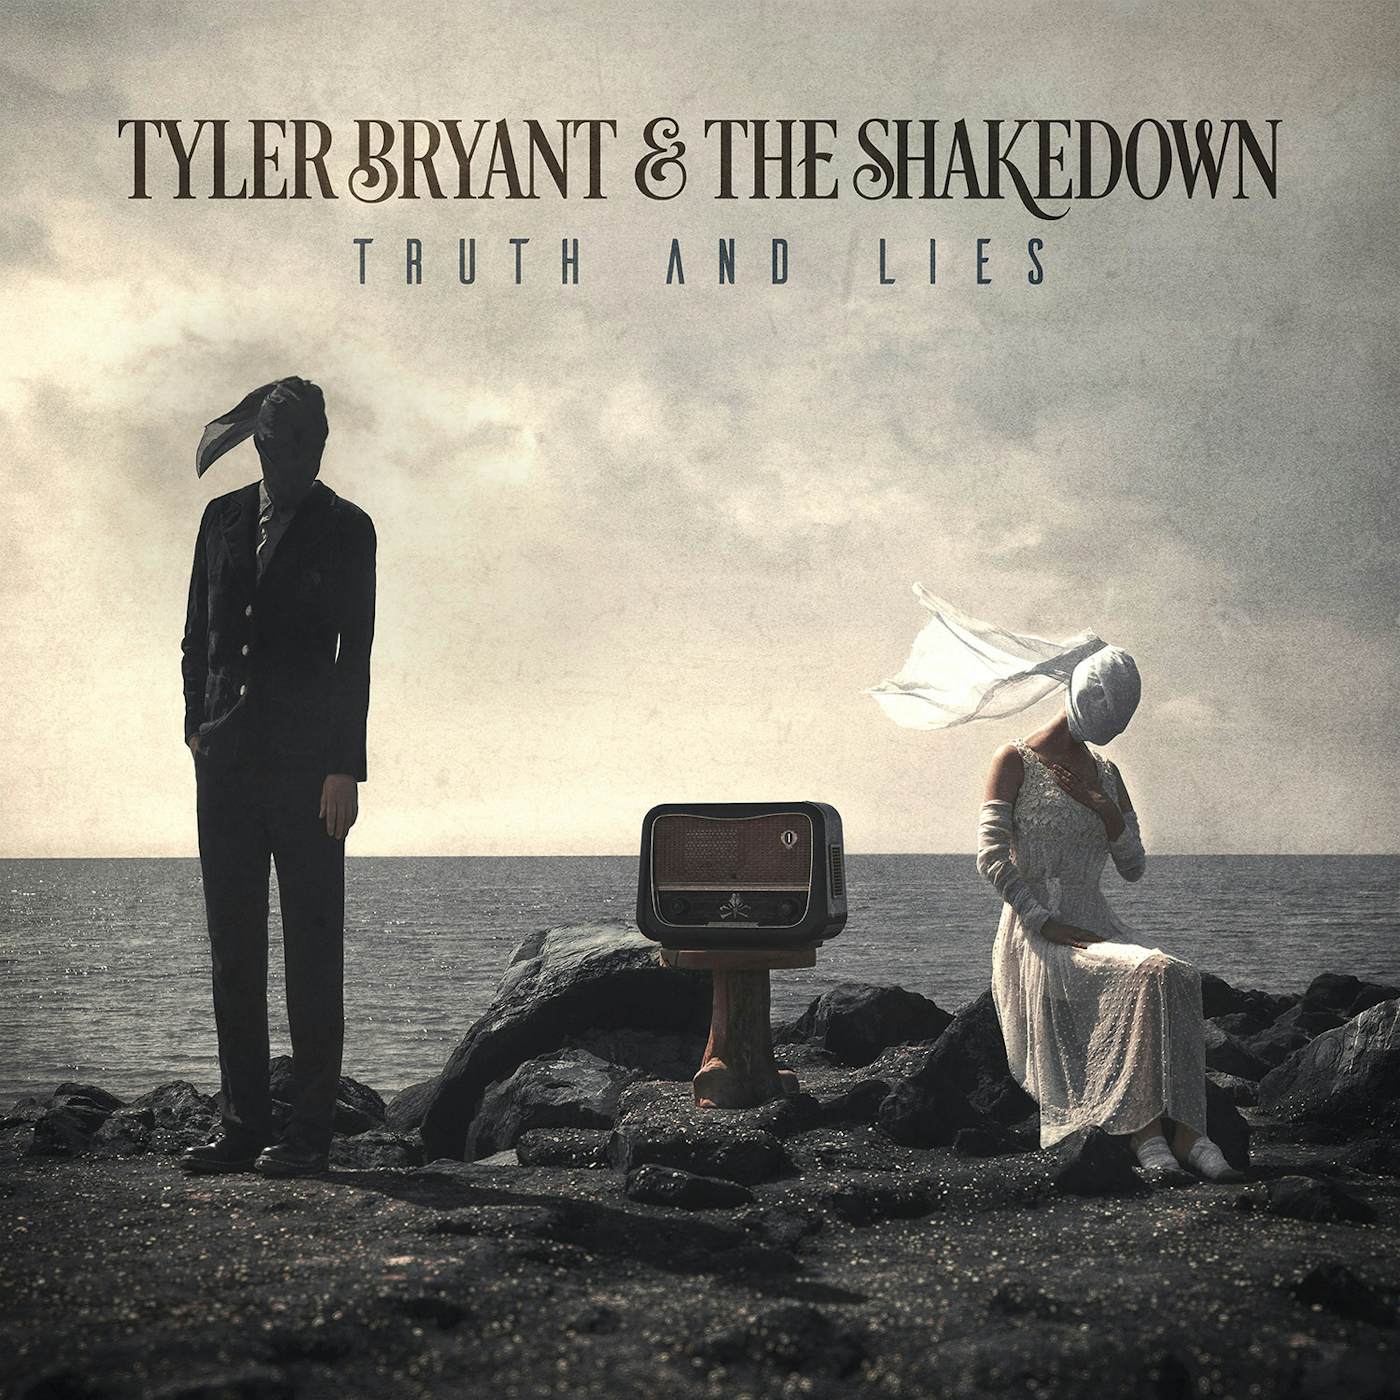 Tyler Bryant & the Shakedown TRUTH AND LIES CD